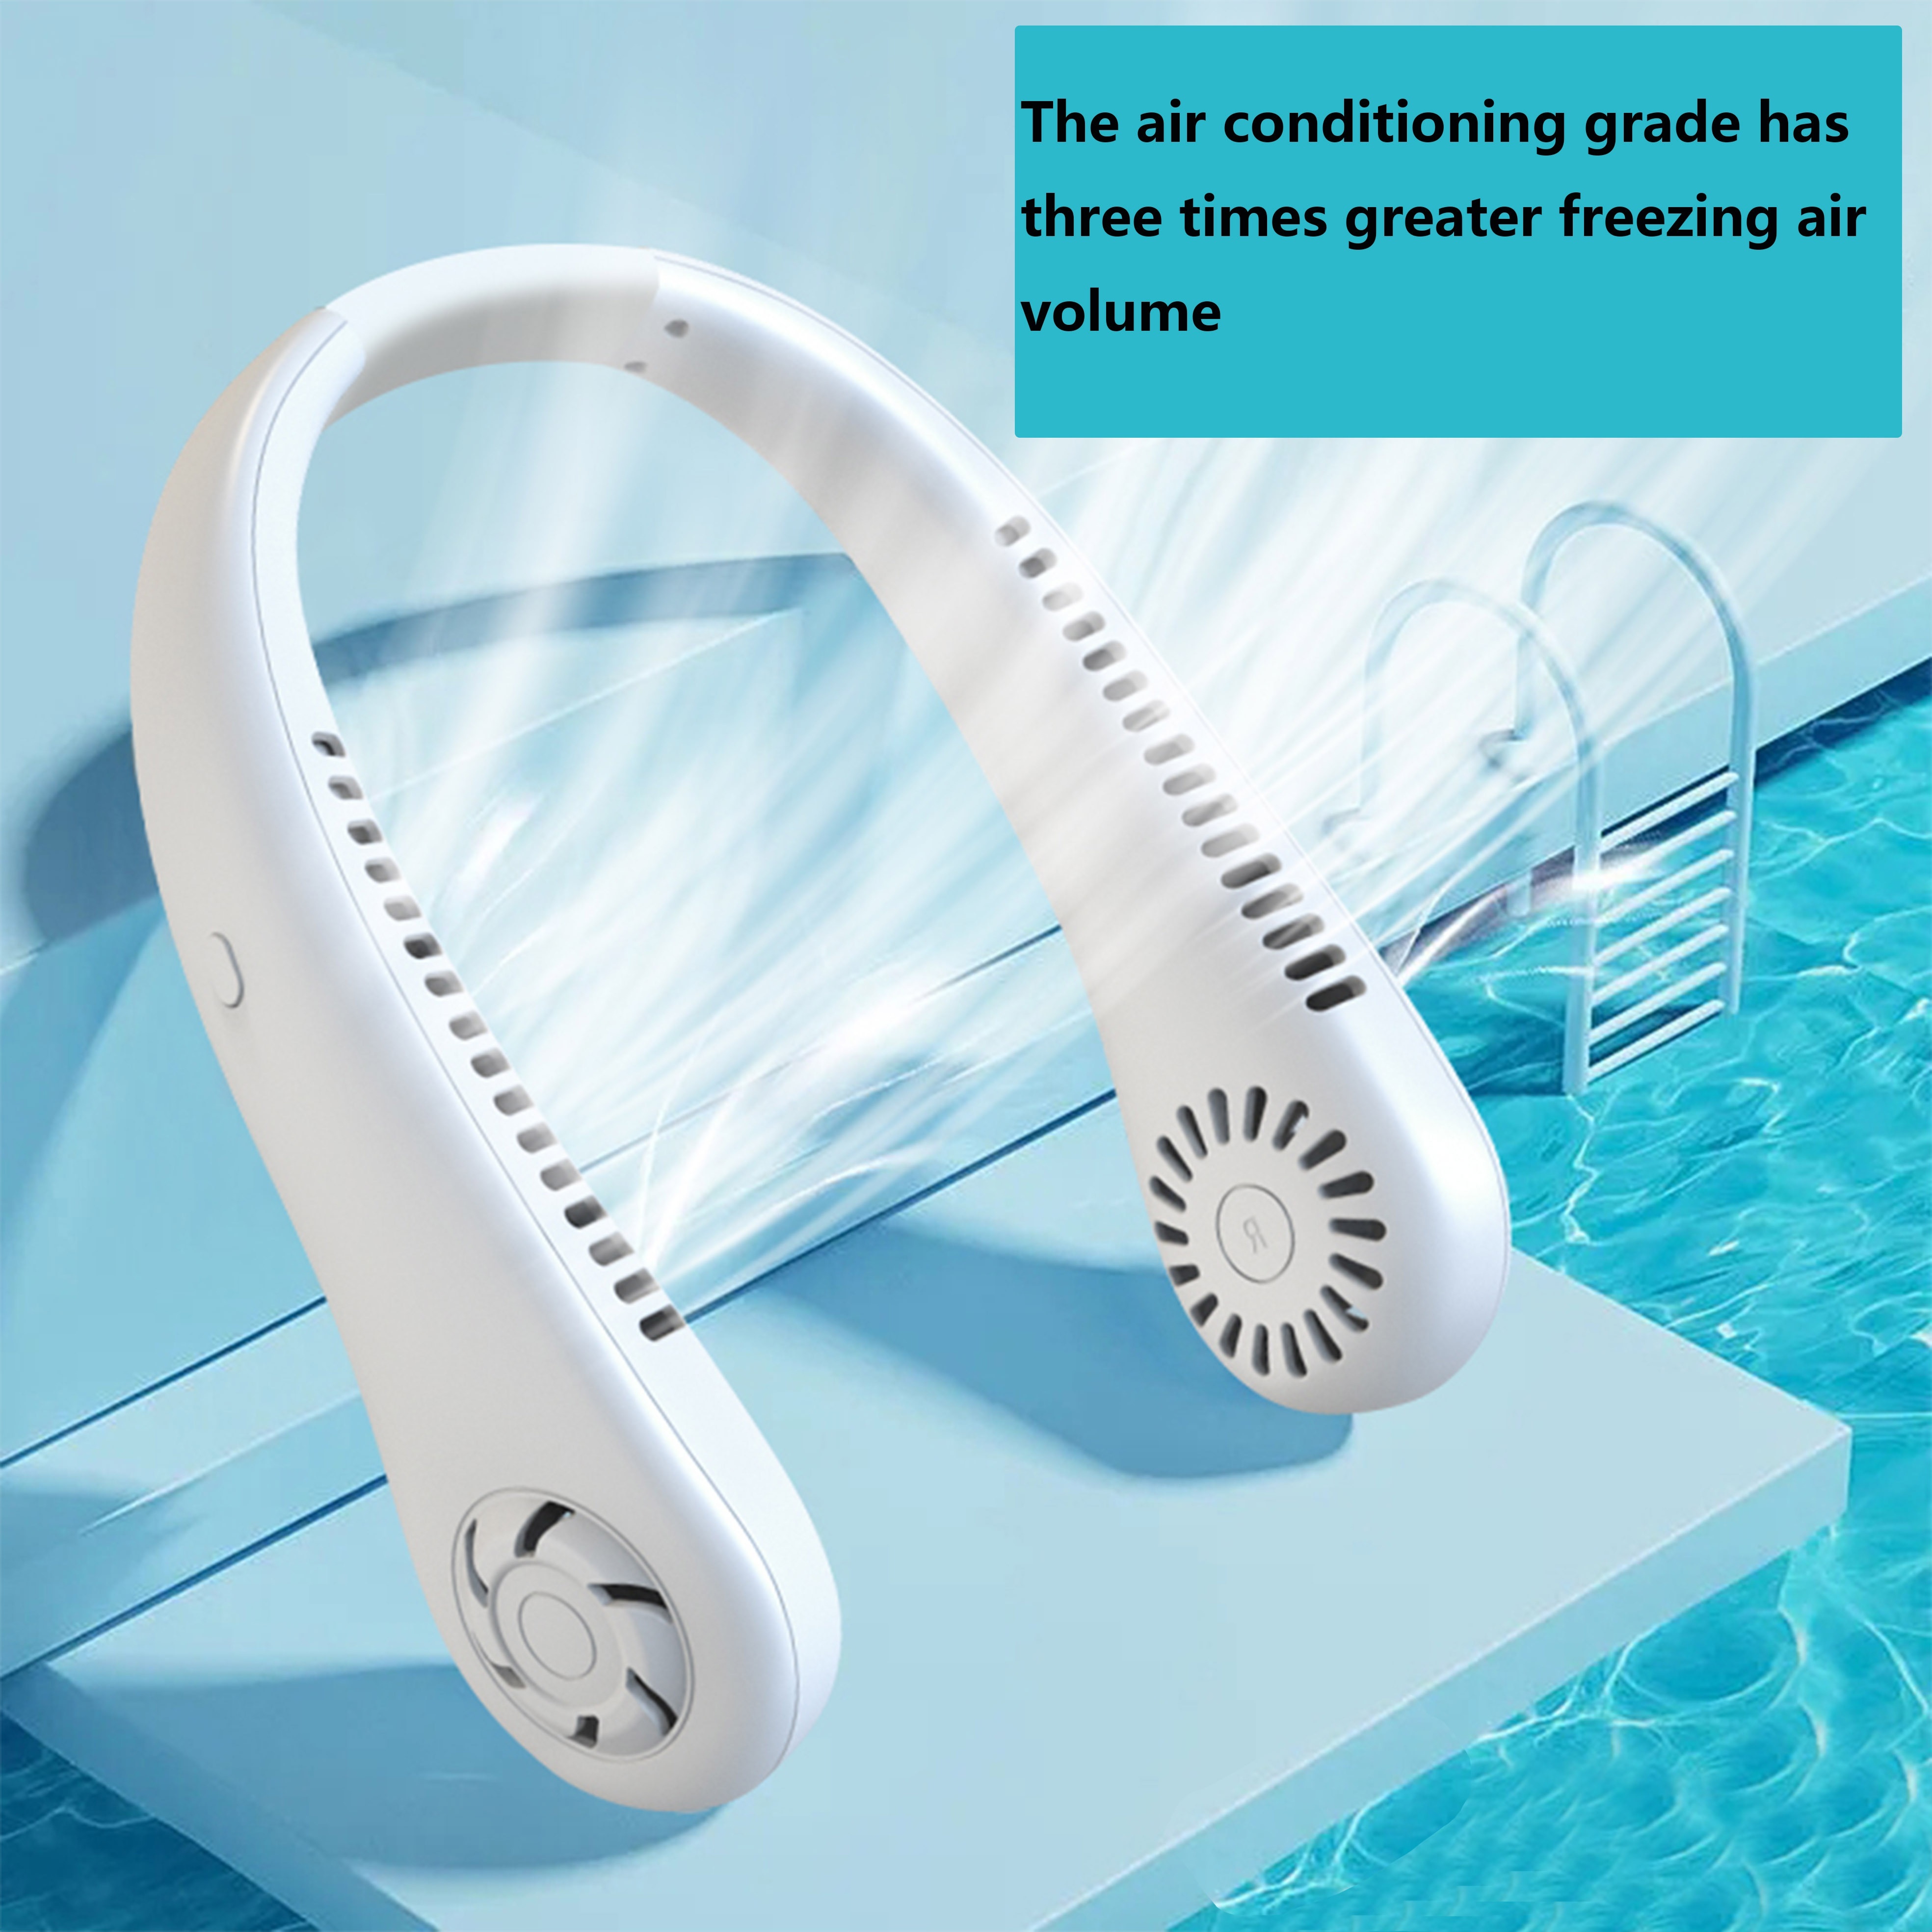 

1pc Neck Fan With This Usb Rechargeable And Adjustable Neck Fan To Stay Cool And Comfortable - Digital Display And No Blades! Very Suitable For Spring And Summer, Cool And Icy